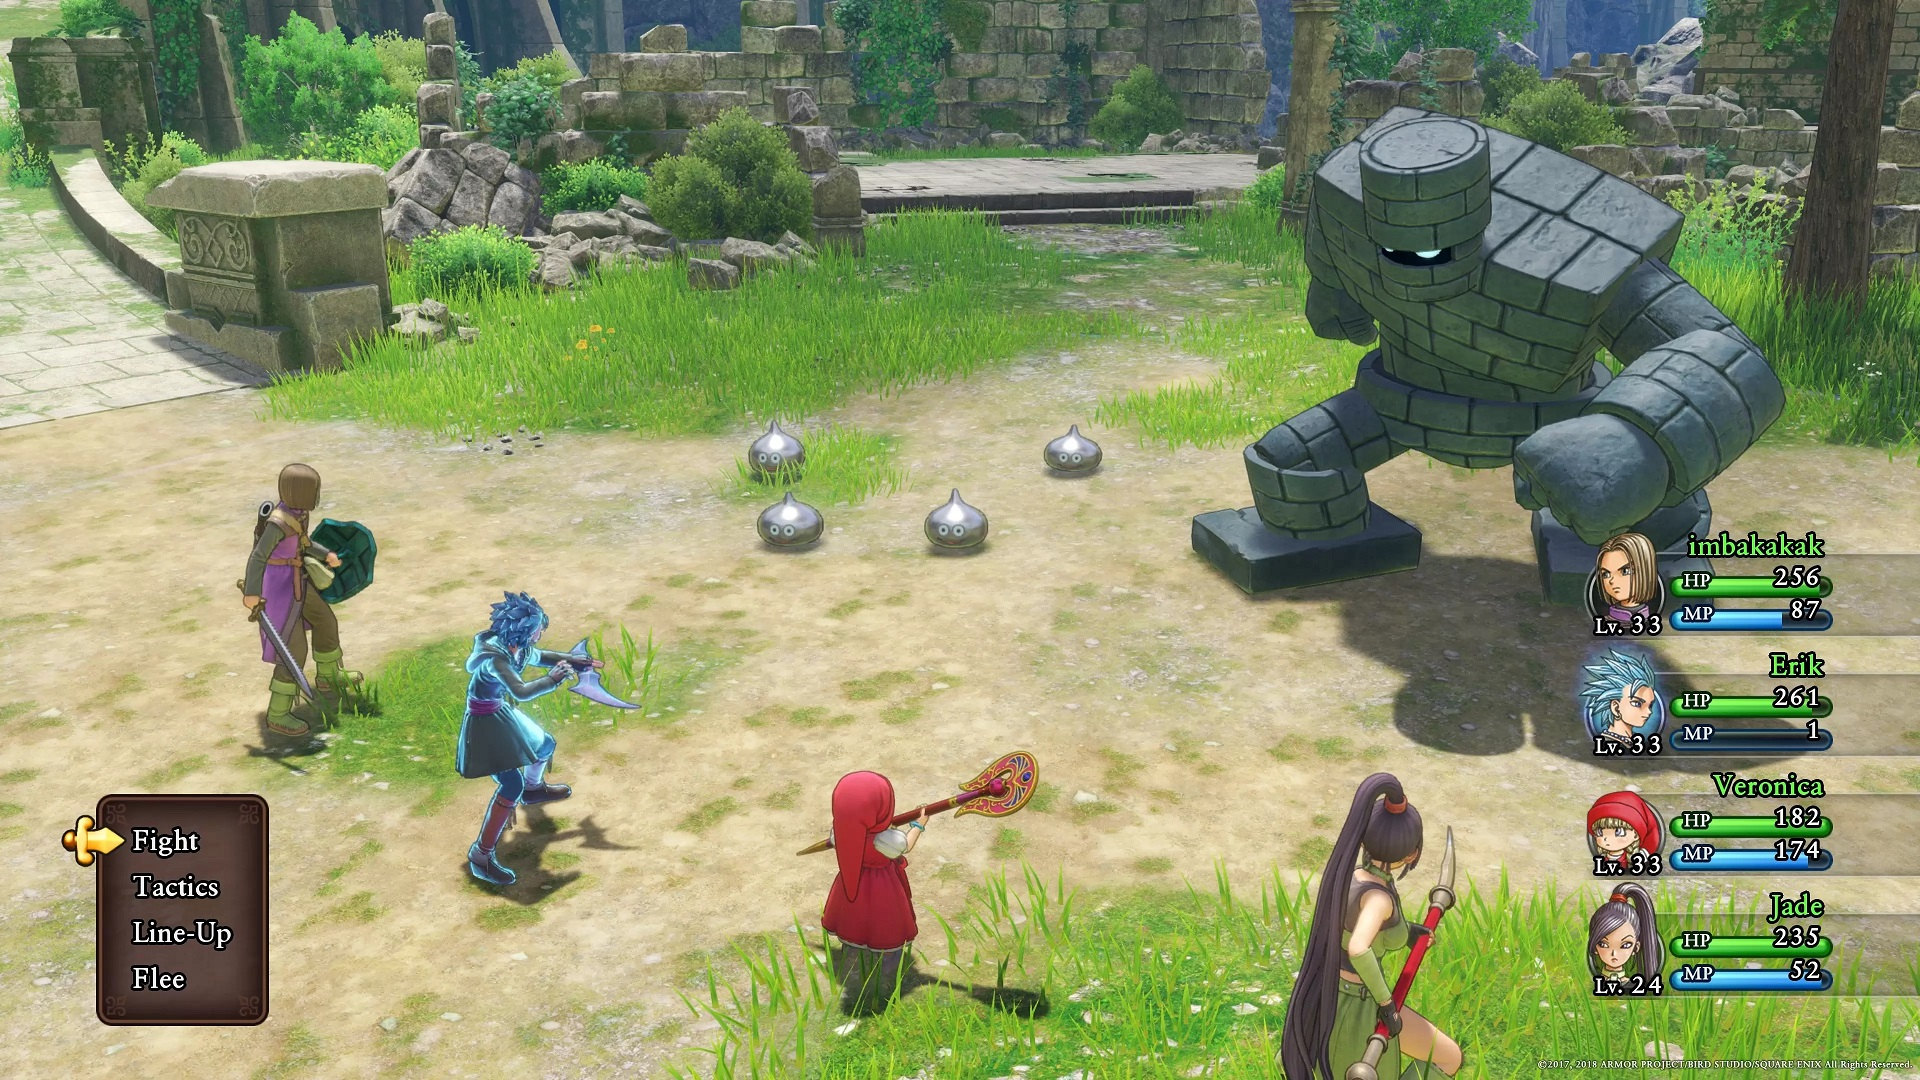 dragon-quest-xi-s-echoes-of-an-elusive-age-definitive-pc-screenshot-2